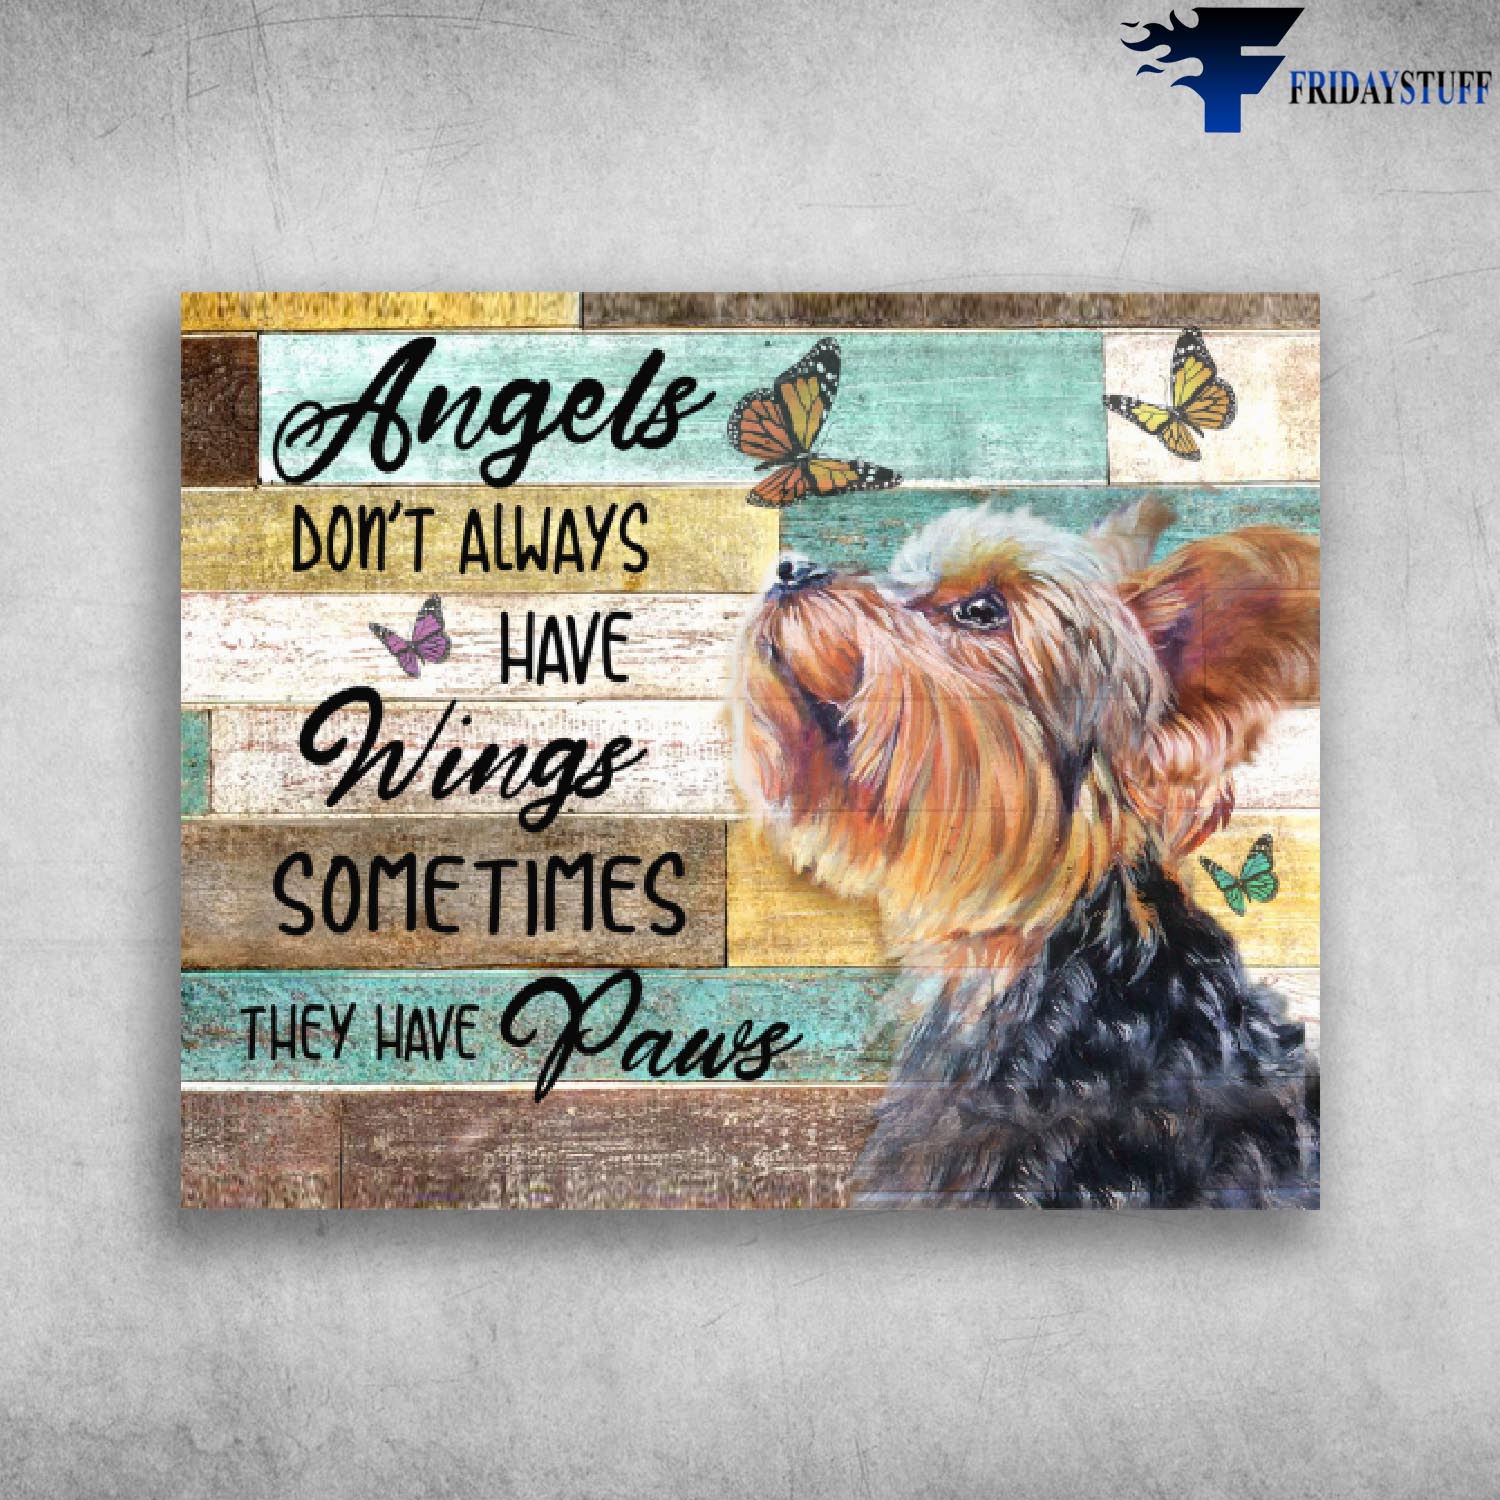 Angels Don't Always Have Wing Sometimes They New Paws - Dog Yorkie Yorkshire Terrier